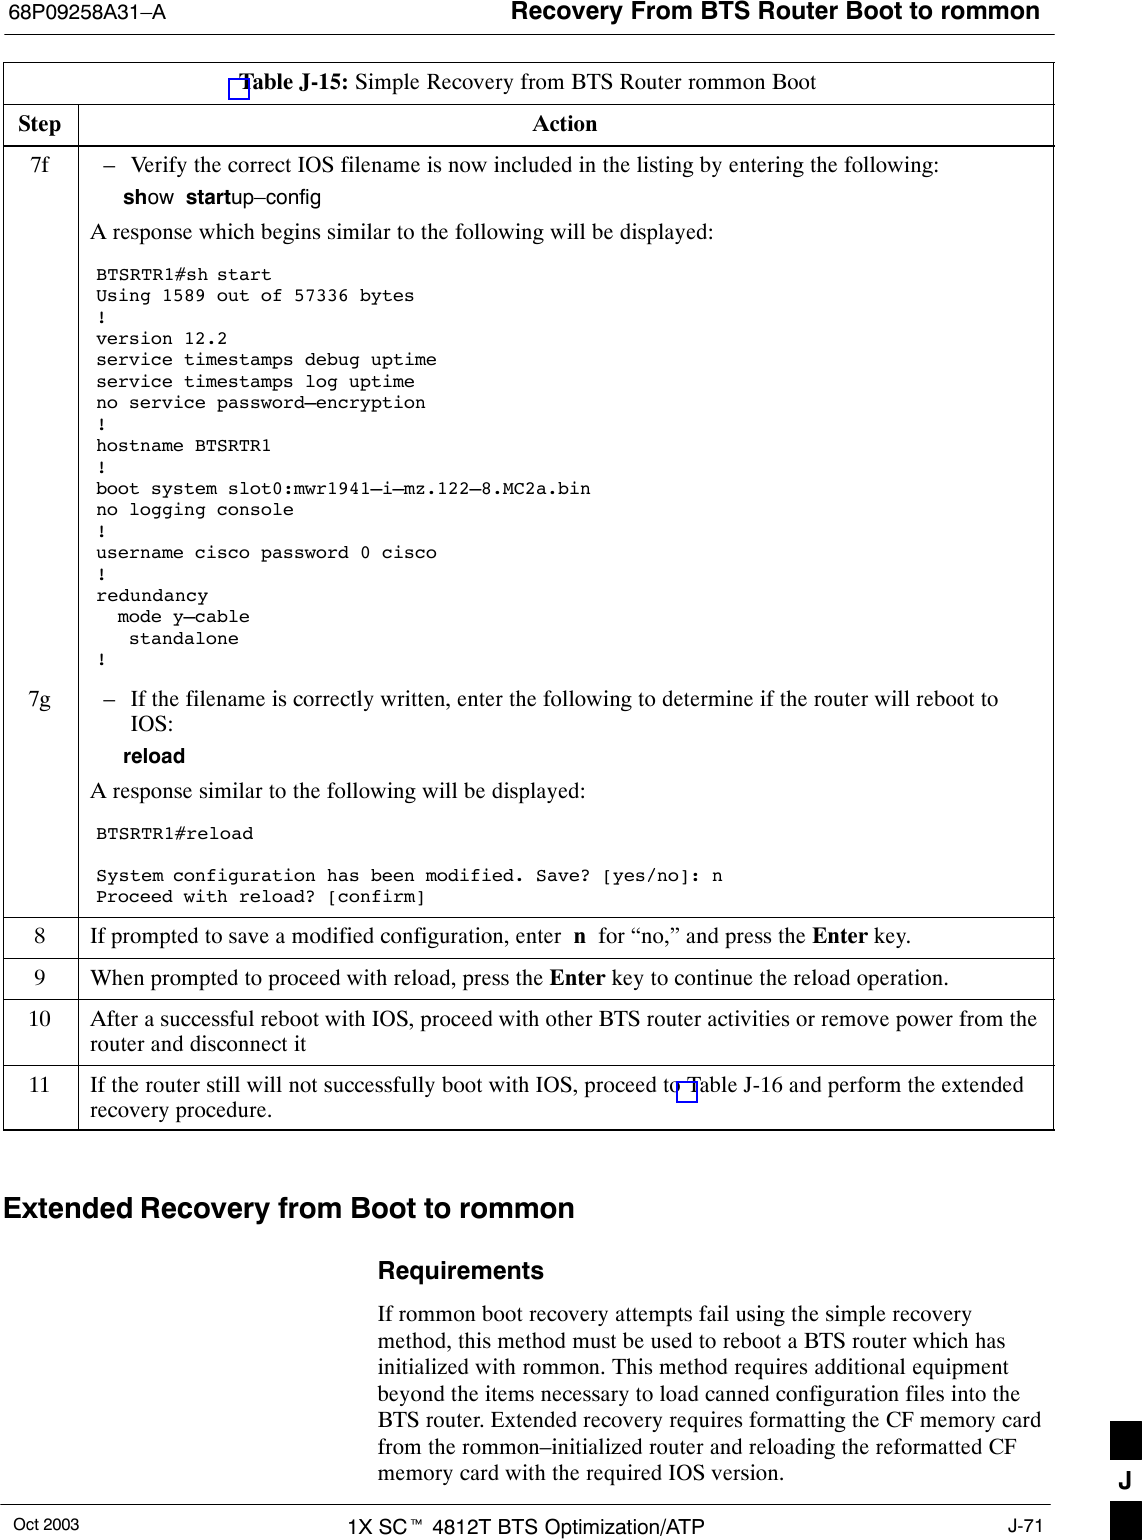 Recovery From BTS Router Boot to rommon68P09258A31–AOct 2003 1X SCt 4812T BTS Optimization/ATP J-71Table J-15: Simple Recovery from BTS Router rommon BootStep Action7f – Verify the correct IOS filename is now included in the listing by entering the following:show  startup–configA response which begins similar to the following will be displayed:BTSRTR1#sh startUsing 1589 out of 57336 bytes!version 12.2service timestamps debug uptimeservice timestamps log uptimeno service password–encryption!hostname BTSRTR1!boot system slot0:mwr1941–i–mz.122–8.MC2a.binno logging console!username cisco password 0 cisco!redundancy  mode y–cable   standalone!7g – If the filename is correctly written, enter the following to determine if the router will reboot toIOS:reloadA response similar to the following will be displayed:BTSRTR1#reloadSystem configuration has been modified. Save? [yes/no]: nProceed with reload? [confirm]8If prompted to save a modified configuration, enter  n  for “no,” and press the Enter key.9When prompted to proceed with reload, press the Enter key to continue the reload operation.10 After a successful reboot with IOS, proceed with other BTS router activities or remove power from therouter and disconnect it11 If the router still will not successfully boot with IOS, proceed to Table J-16 and perform the extendedrecovery procedure. Extended Recovery from Boot to rommonRequirementsIf rommon boot recovery attempts fail using the simple recoverymethod, this method must be used to reboot a BTS router which hasinitialized with rommon. This method requires additional equipmentbeyond the items necessary to load canned configuration files into theBTS router. Extended recovery requires formatting the CF memory cardfrom the rommon–initialized router and reloading the reformatted CFmemory card with the required IOS version. J